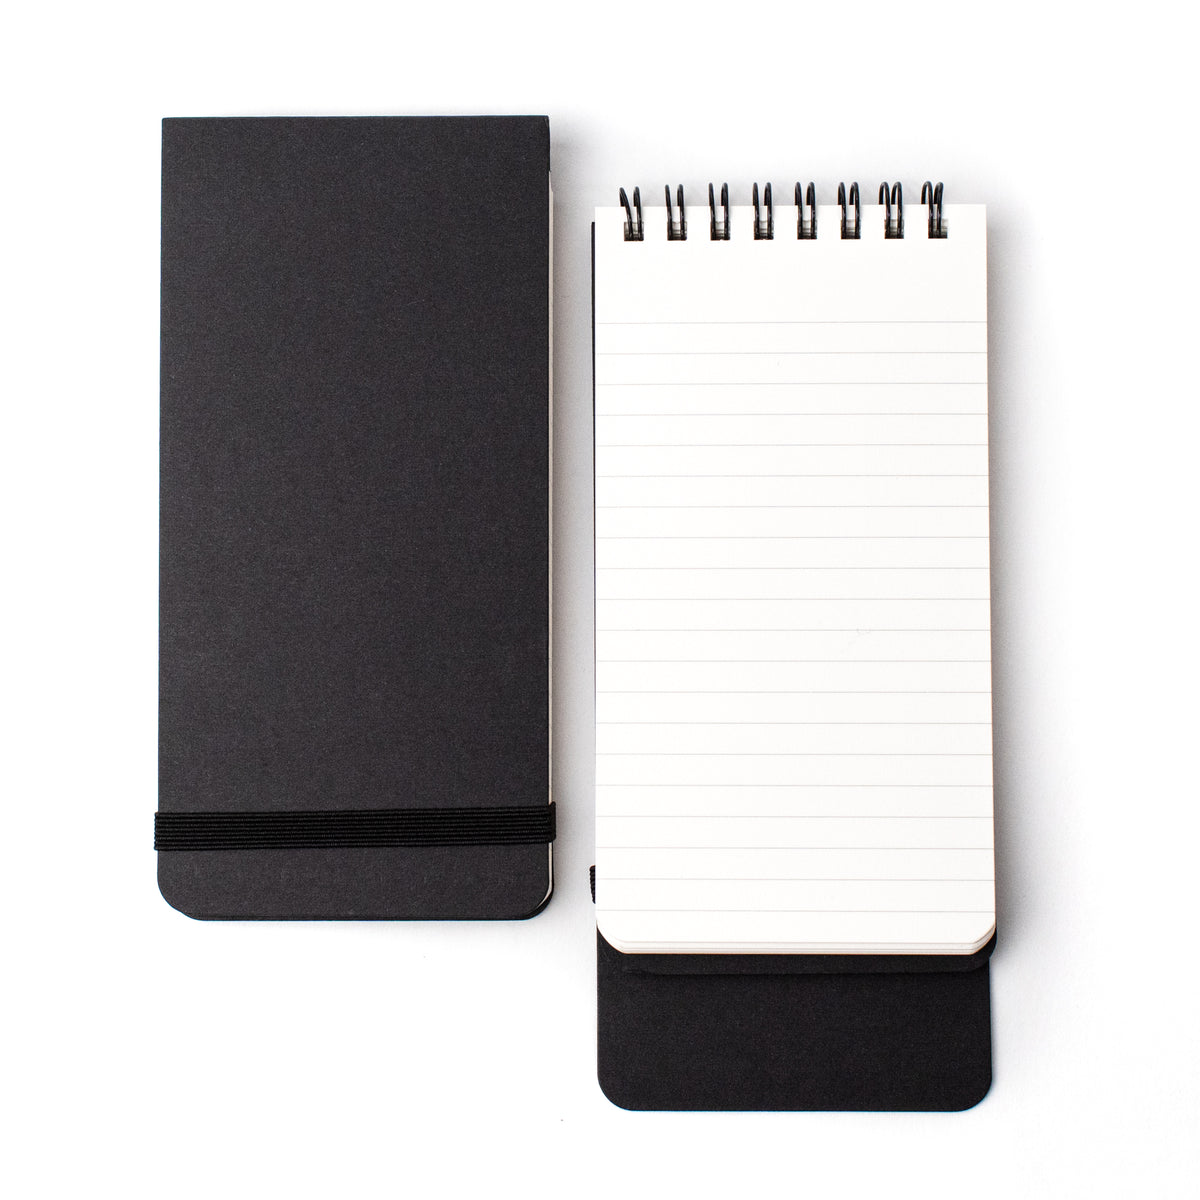 A Blackwing Reporter Pad with a spiral on top, perfect for note-taking or sketching.